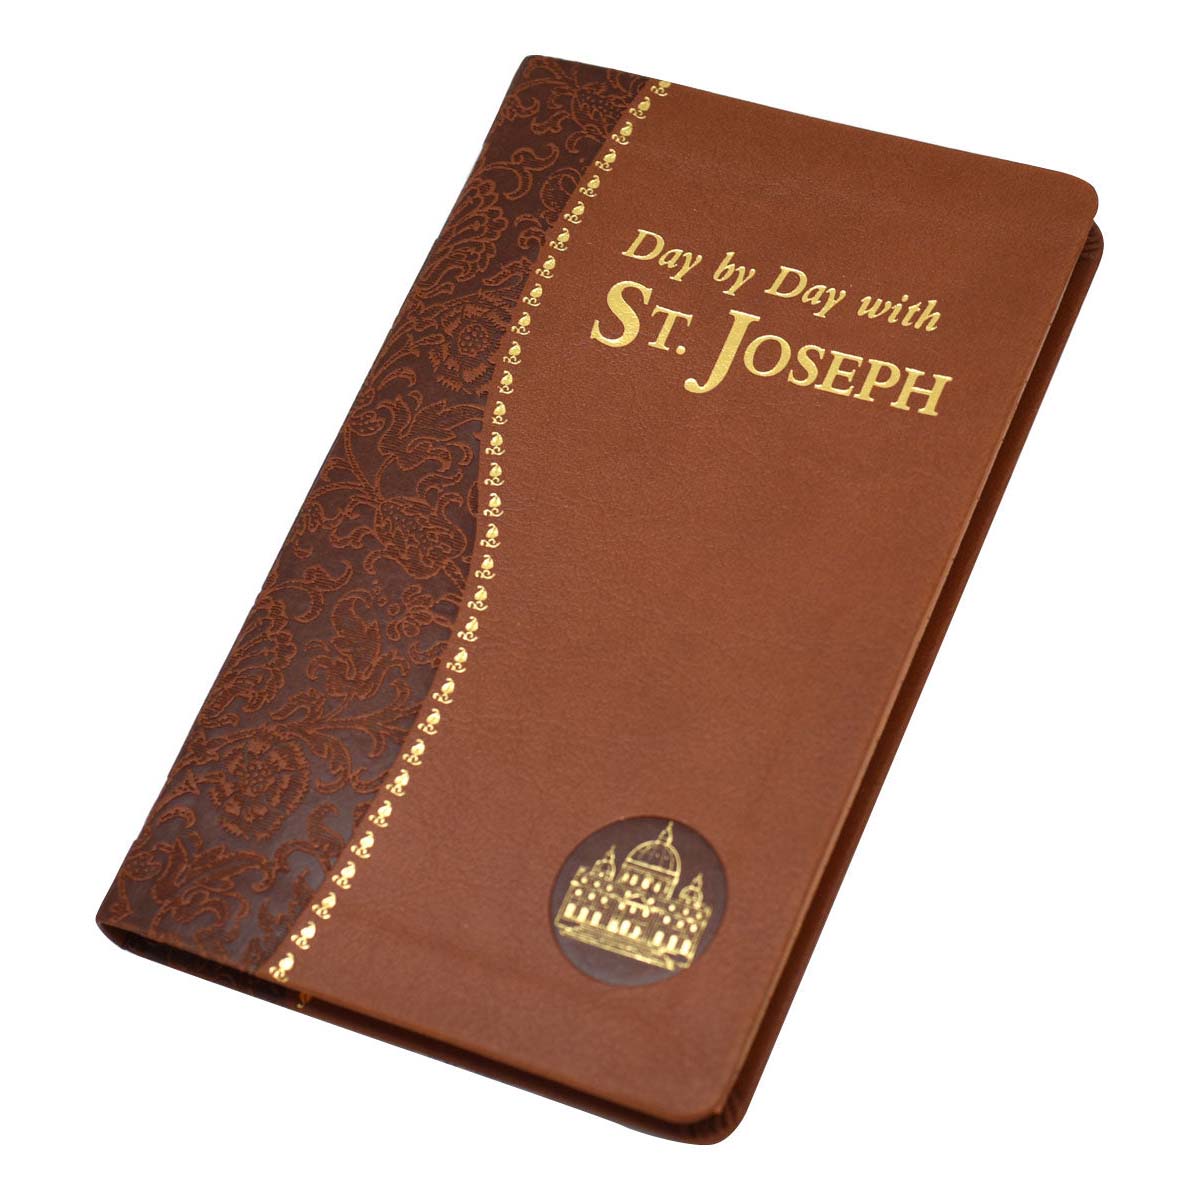 Day By Day with St. Joseph-KofC Logo